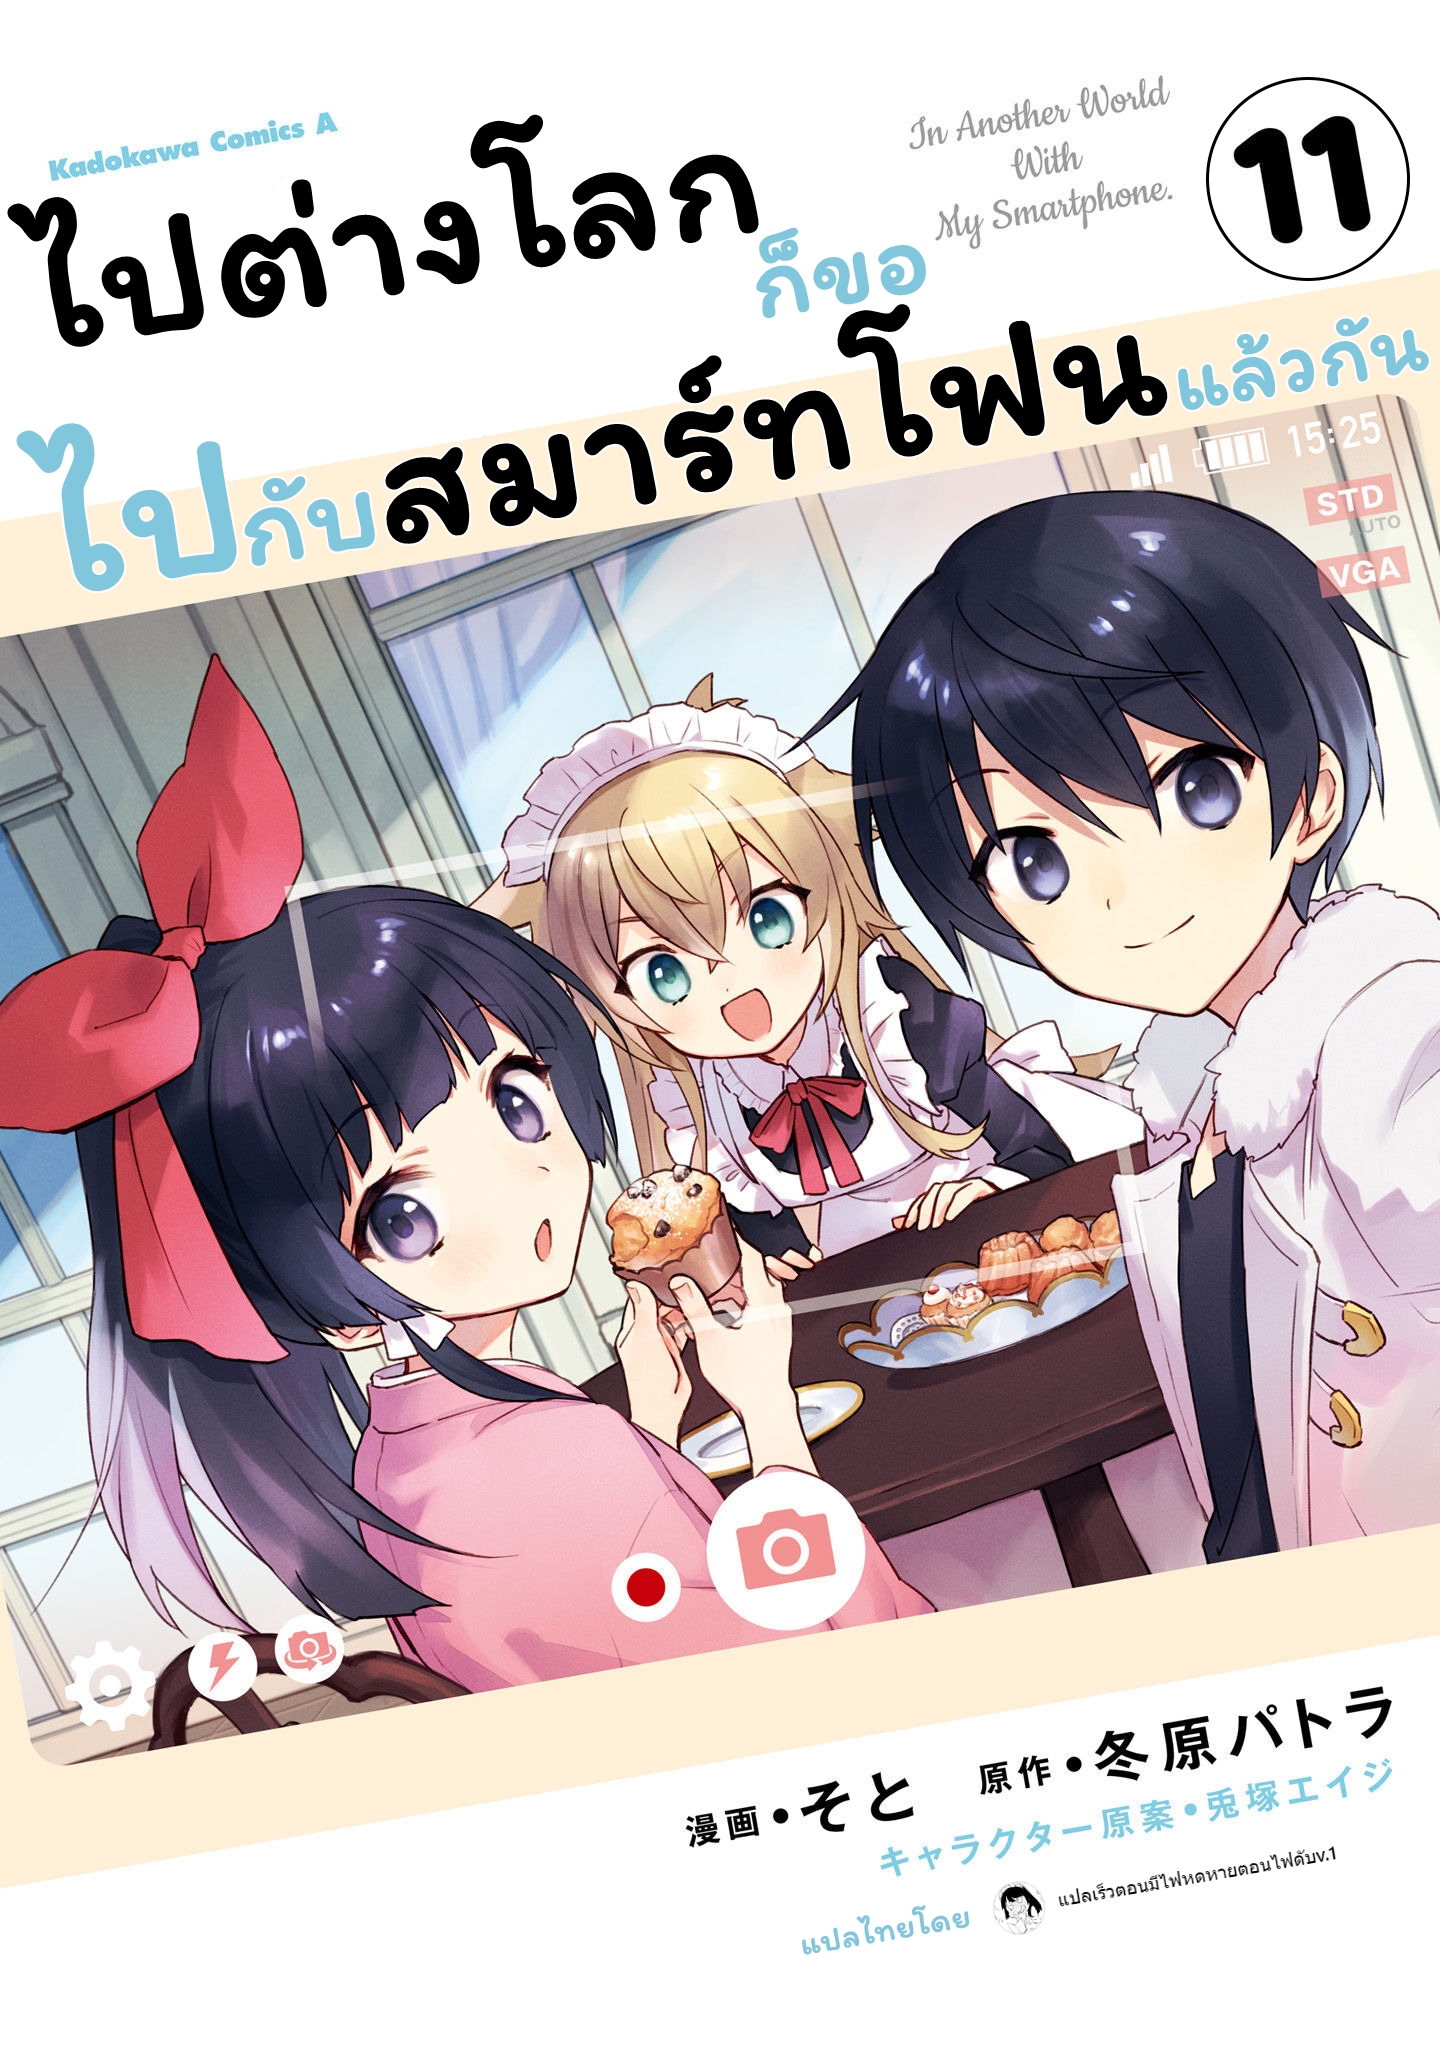 In Another World With My Smartphone ตอนที่ 57.2 (1)